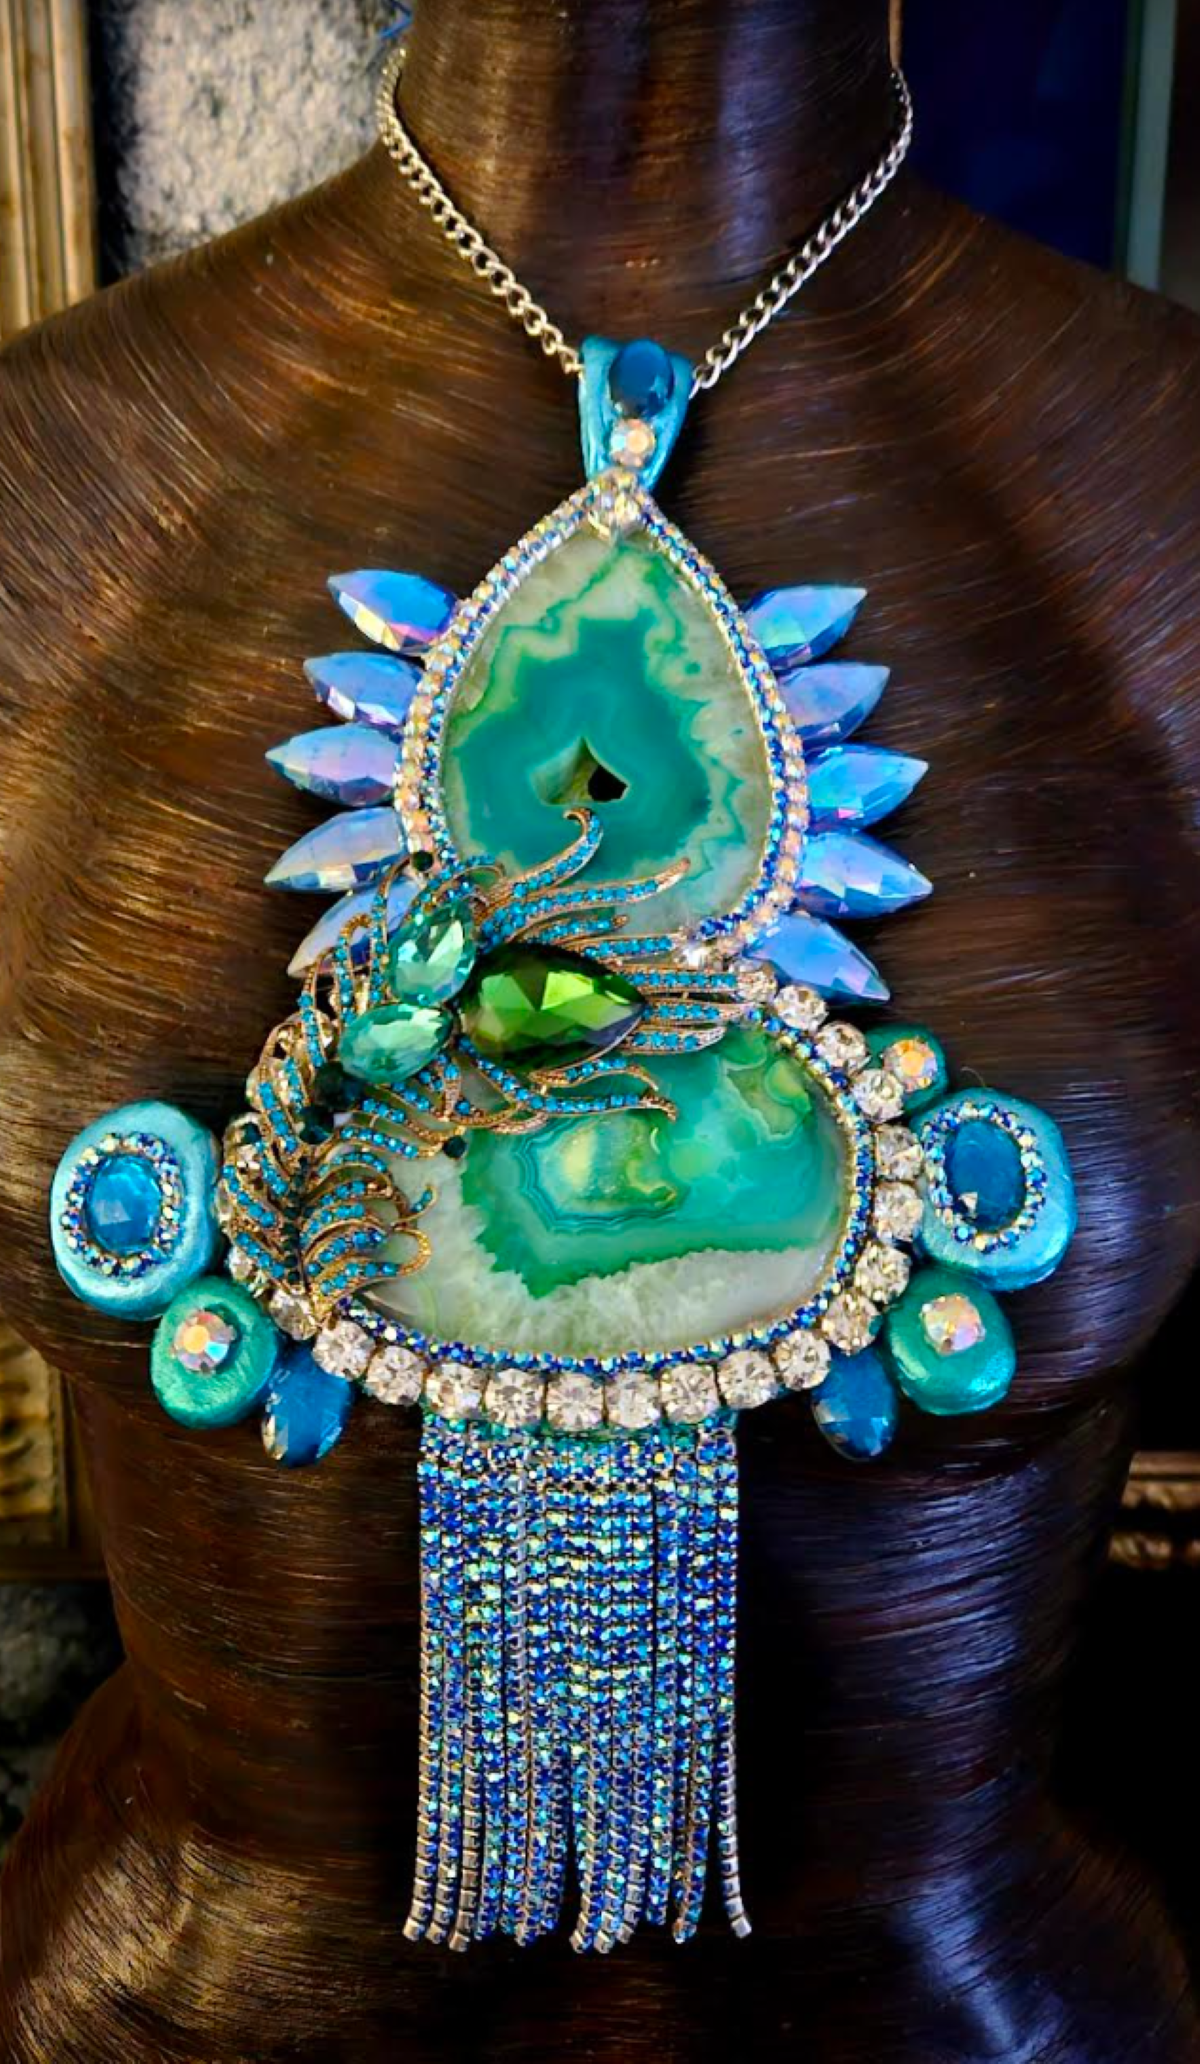 Art Deco Sculpted Crystal & Rhinestone Statement Pendant - Stunning Blue Green Bling Bling Chest Piece -  Flapper Jewelry from Kat Kouture Designs